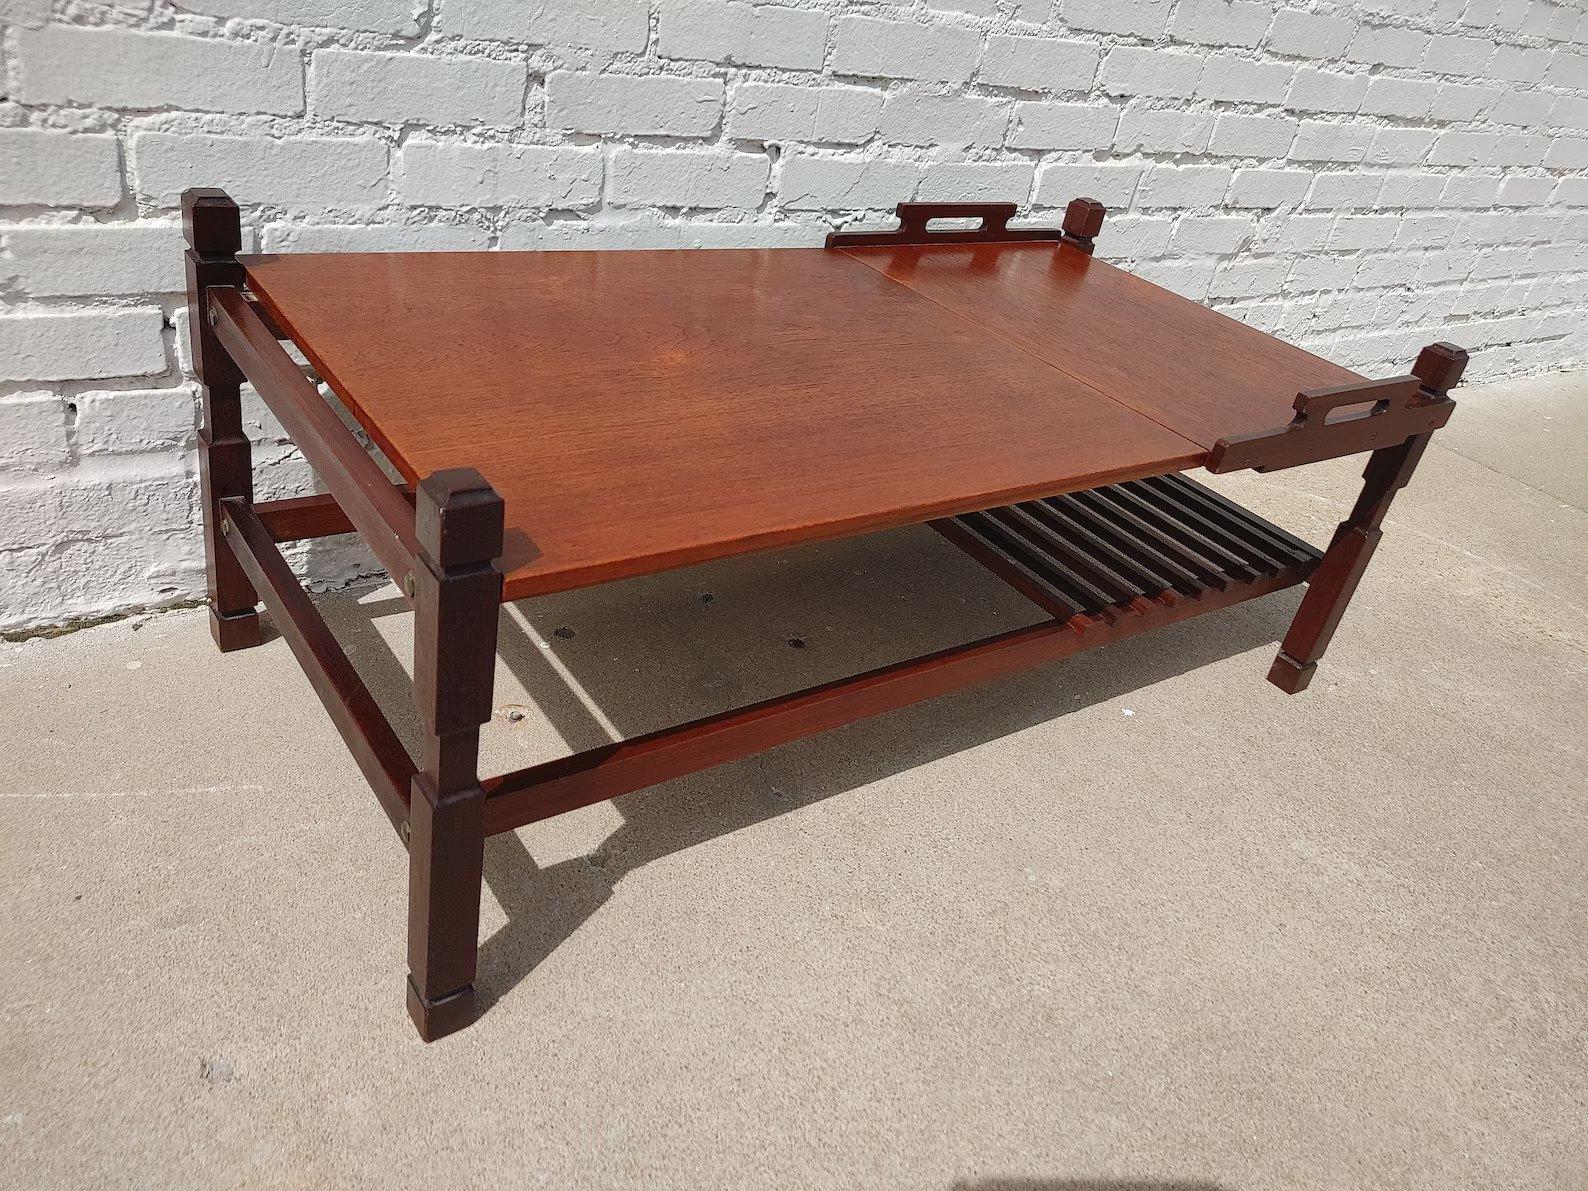 Mid Century Modern Italian Modern Teak Coffee Table

Above average vintage condition and structurally sound. Has some expected slight finish wear and scratching. Edges have some dings and a couple small veneer chips. Portion of top is removable and